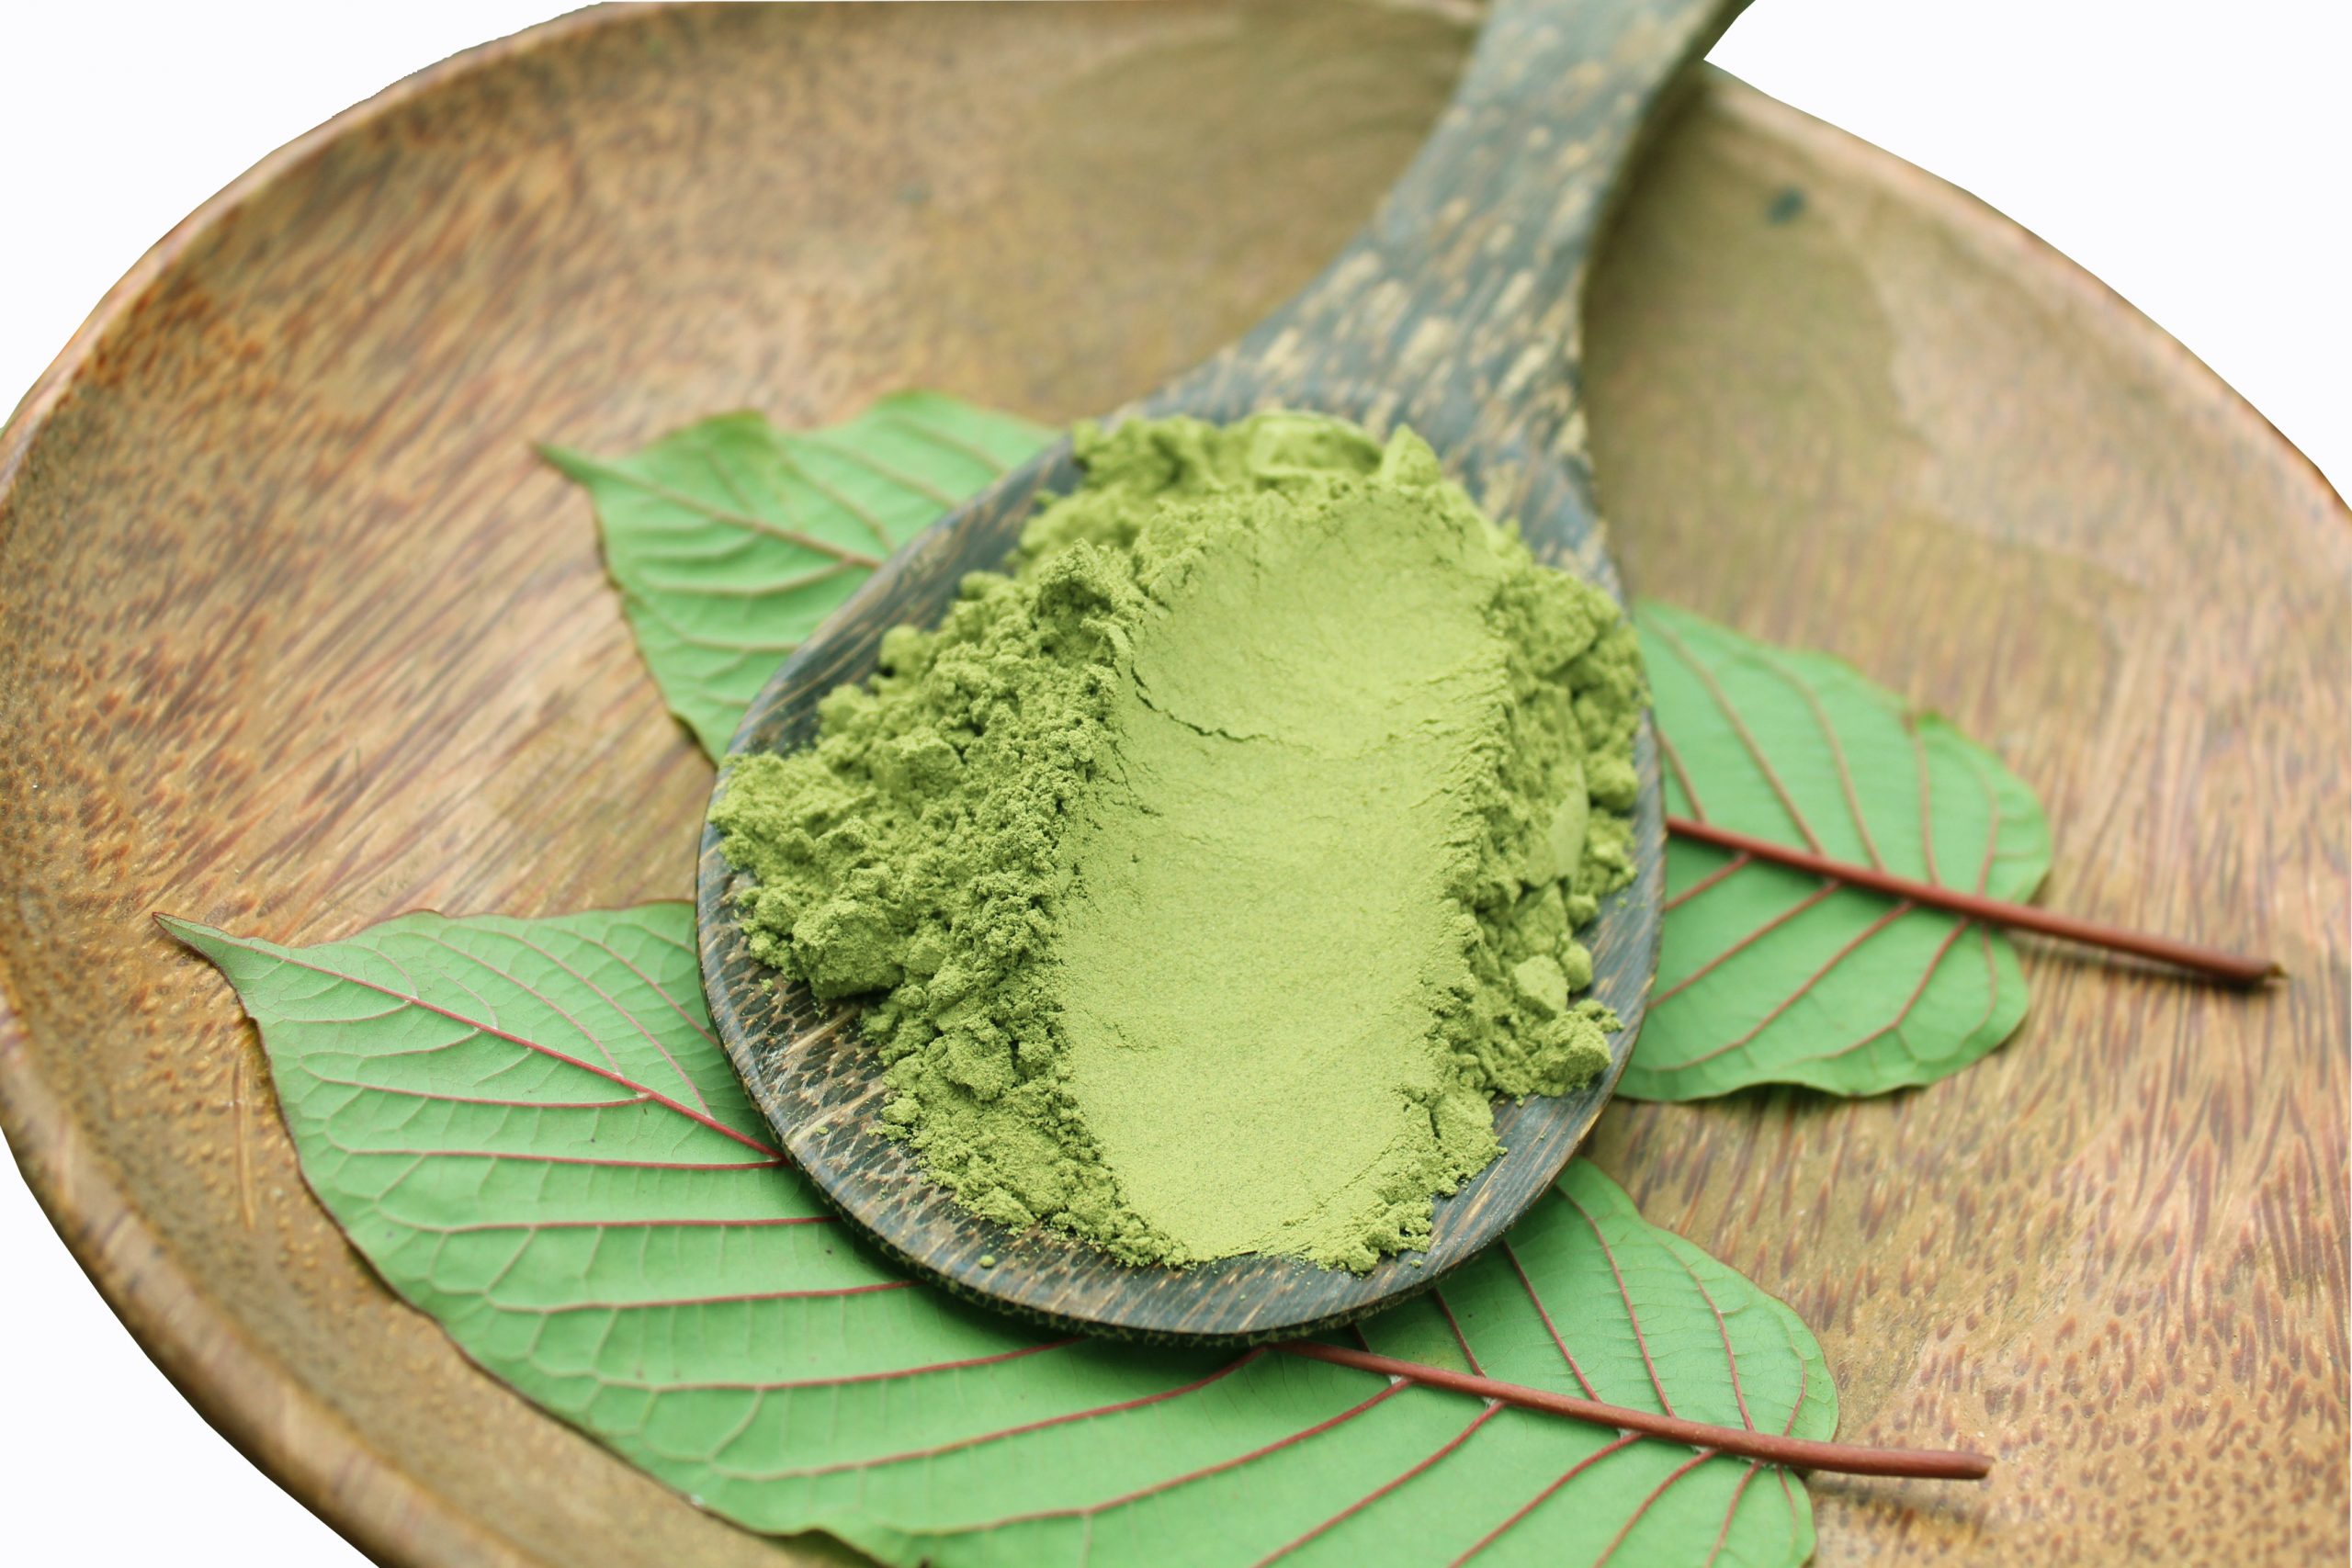 The Best Kratom Tea Leaves, Good For Health And Solving Other Problems